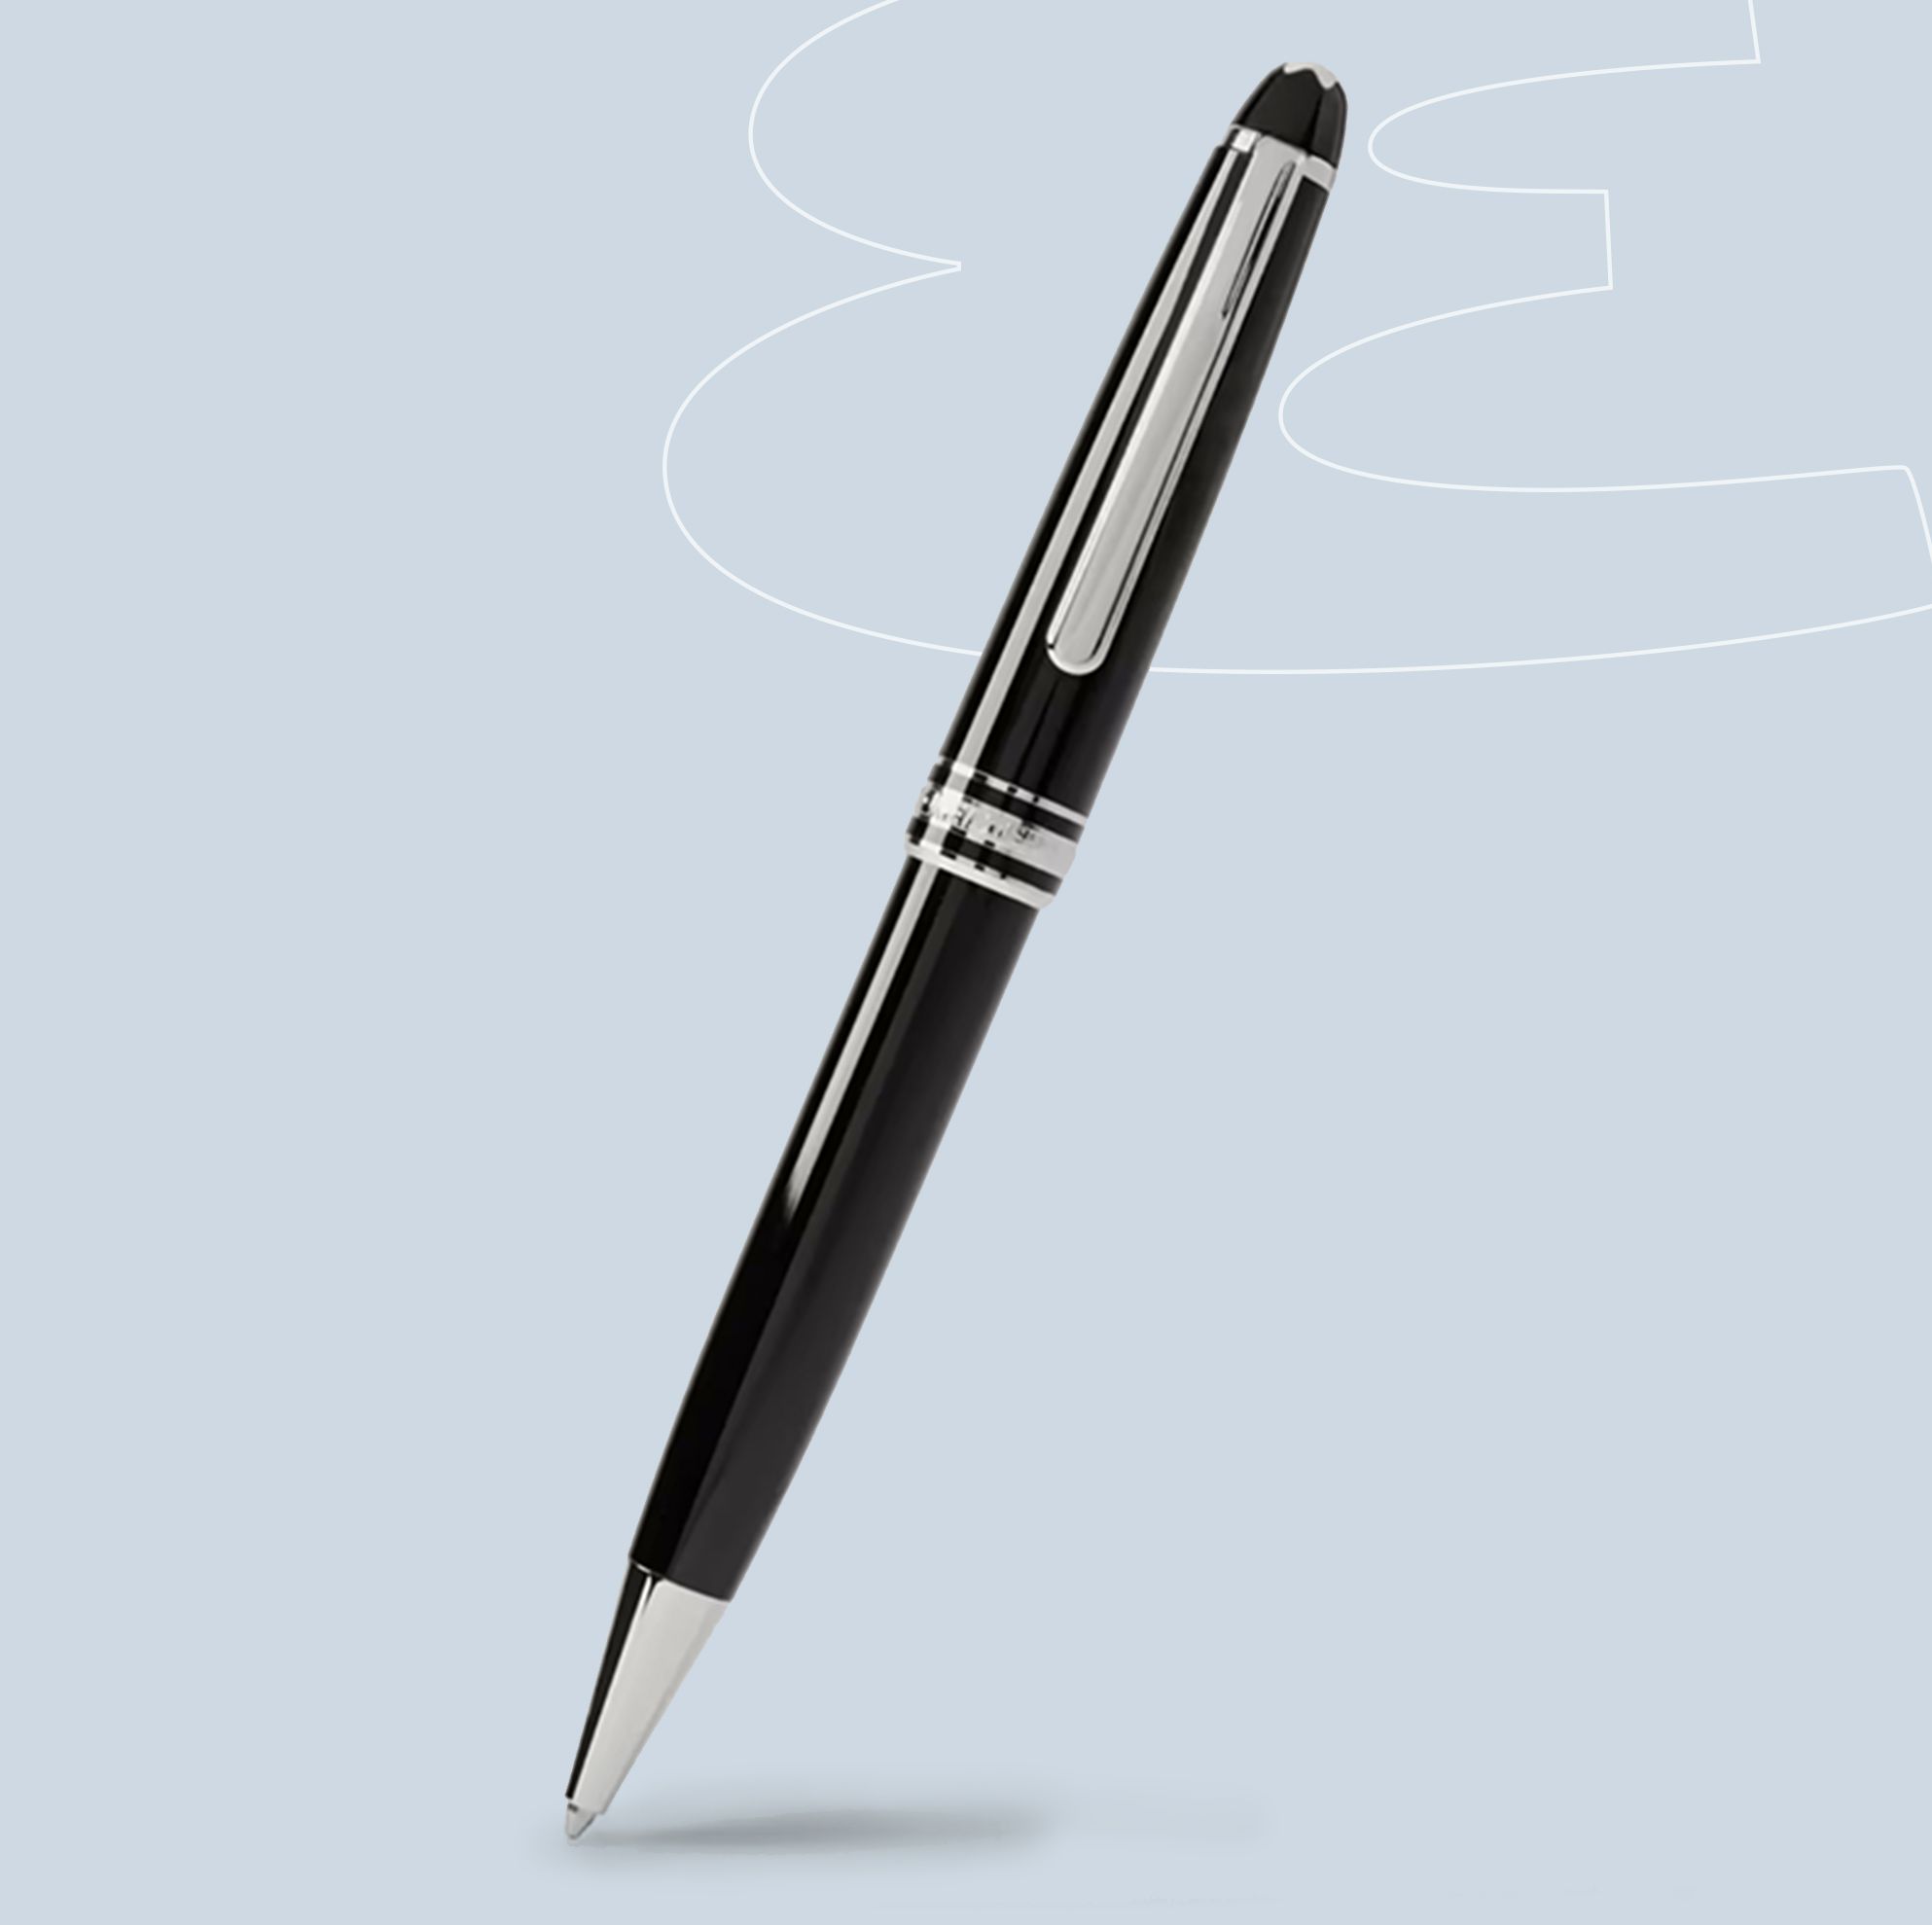 Officially, the 13 Best Pens of All Time